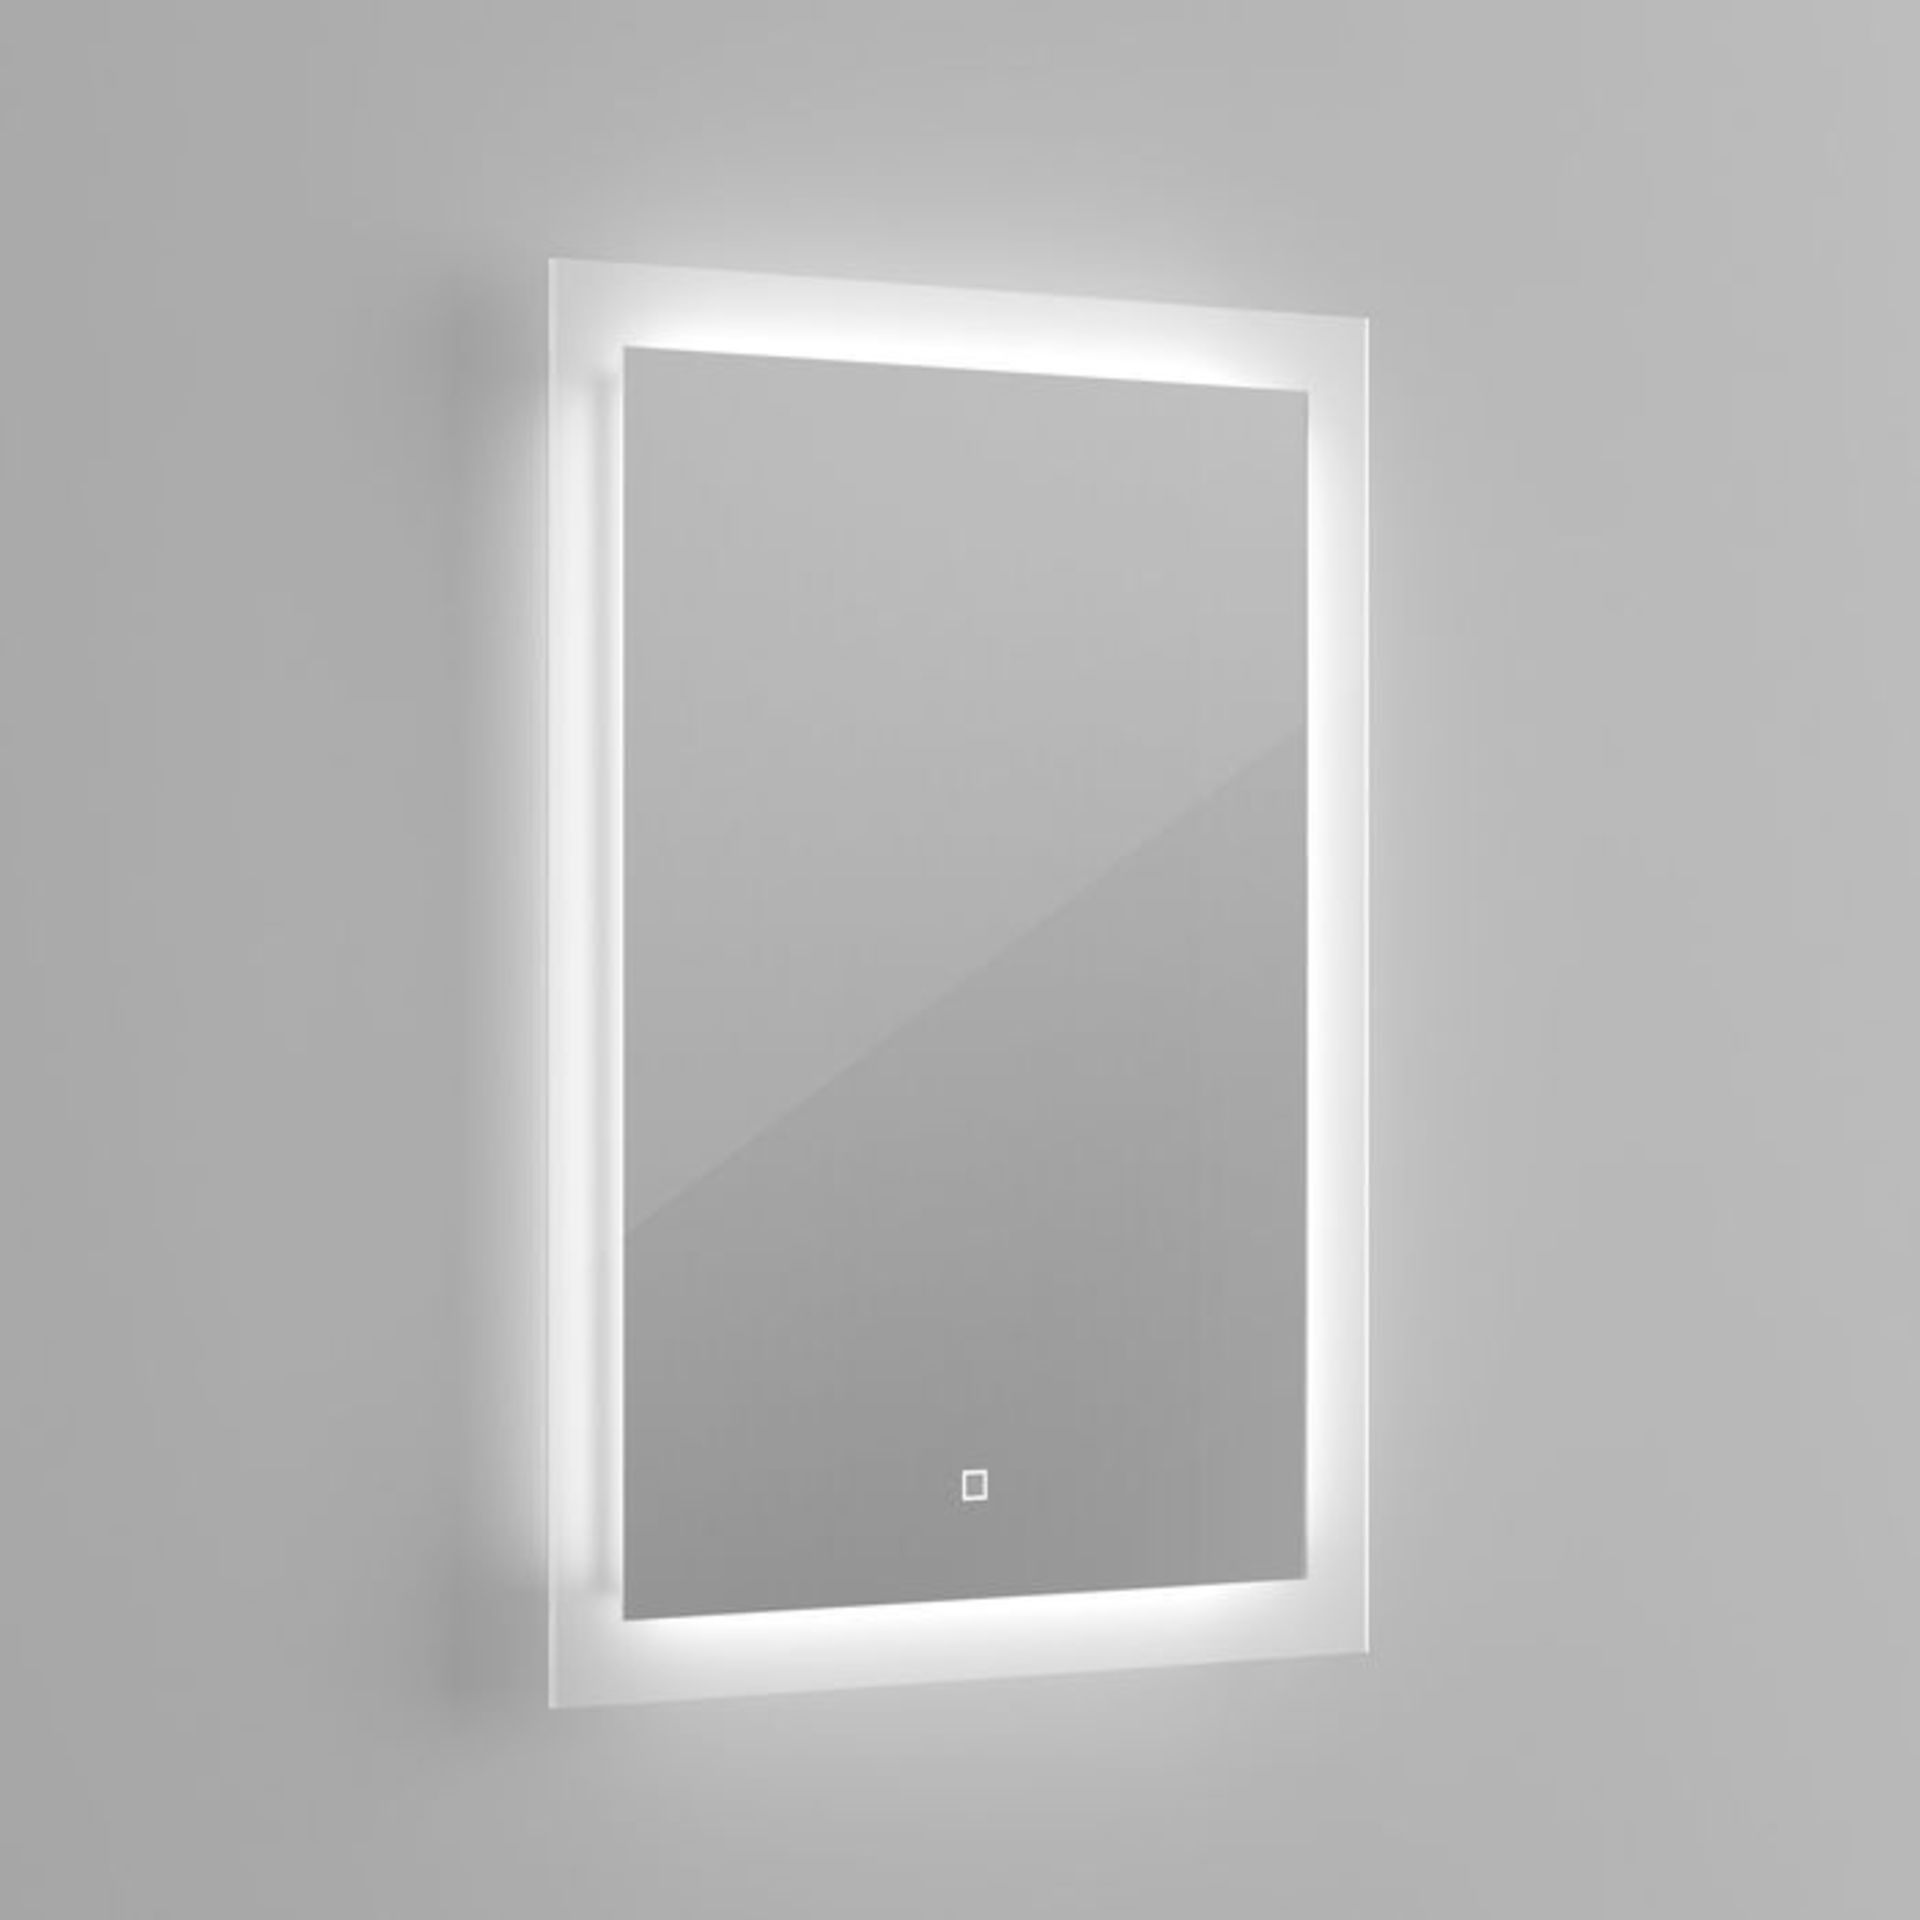 (DK149) 500x700mm Orion Illuminated LED Mirror - Switch Control. RRP £349.99. Energy efficient LED - Image 5 of 5